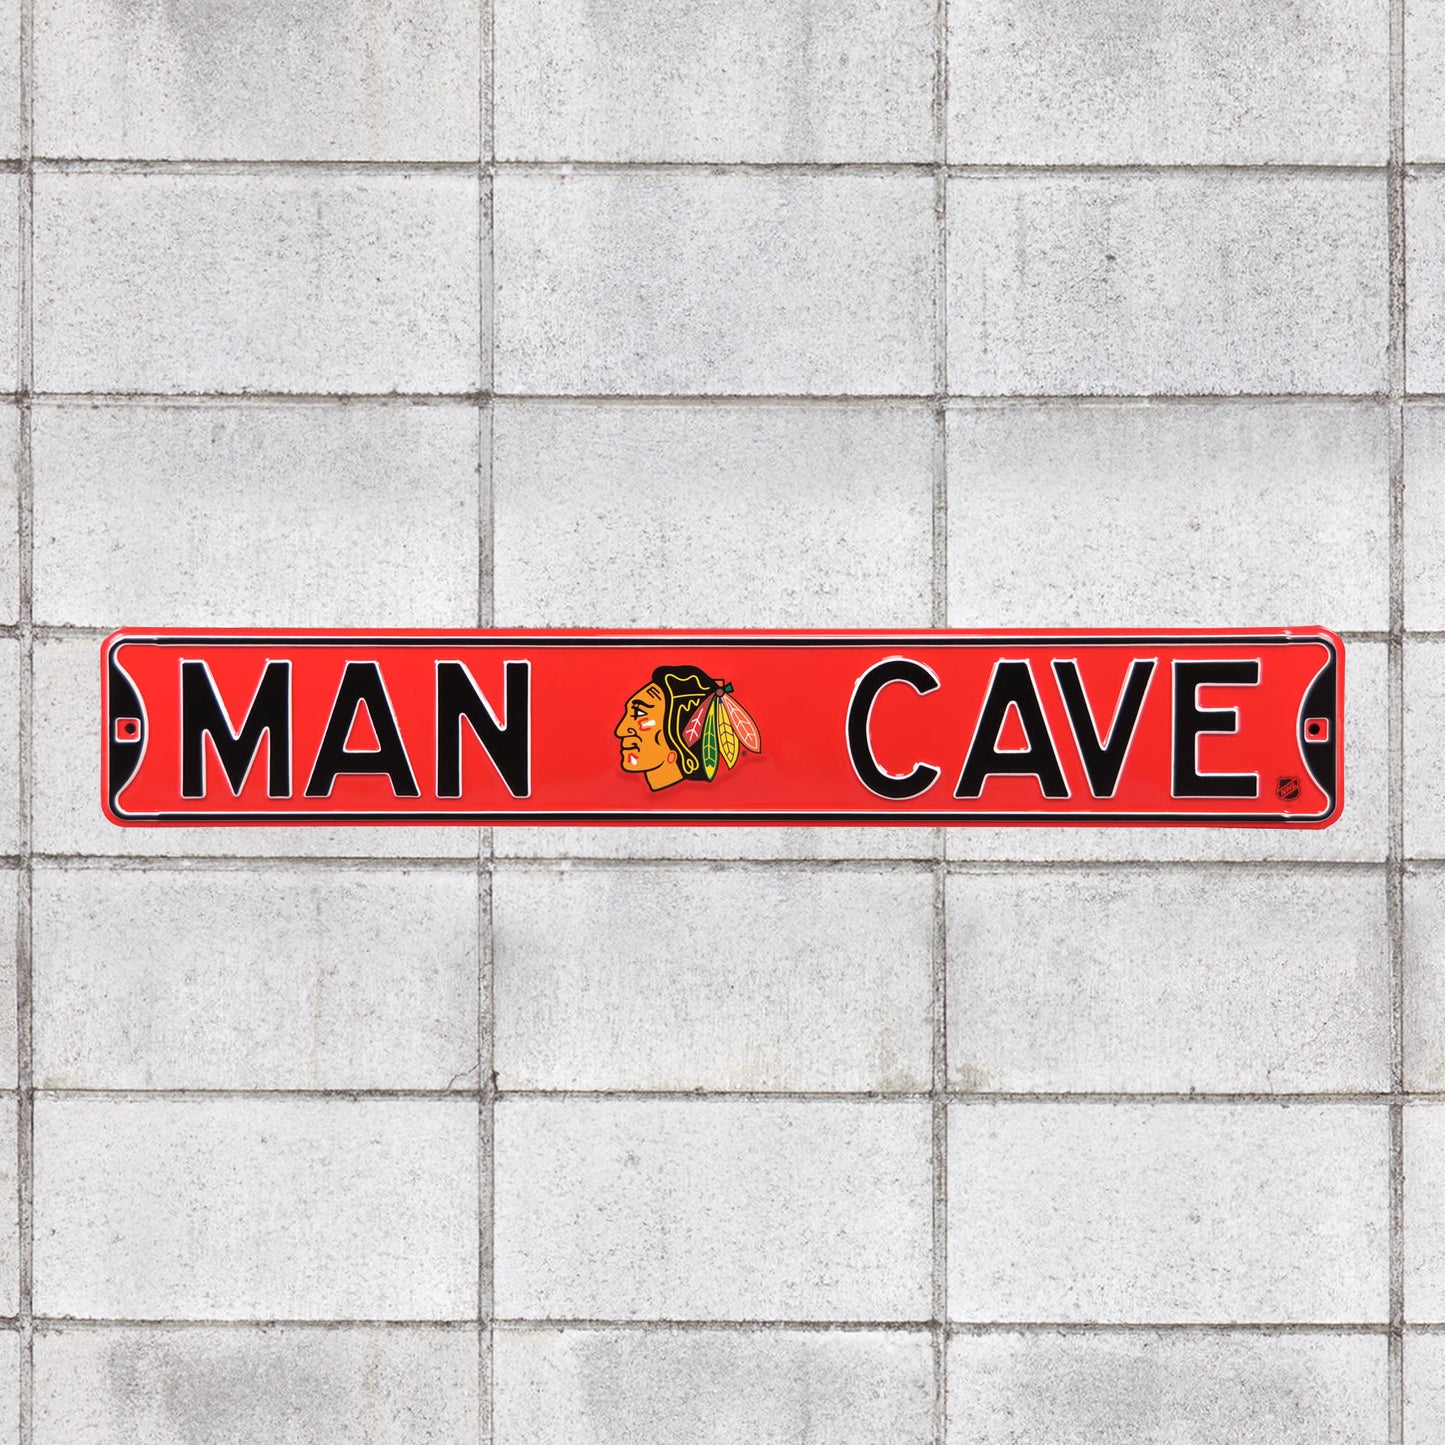 Chicago Blackhawks: Man Cave - Officially Licensed NHL Metal Street Sign